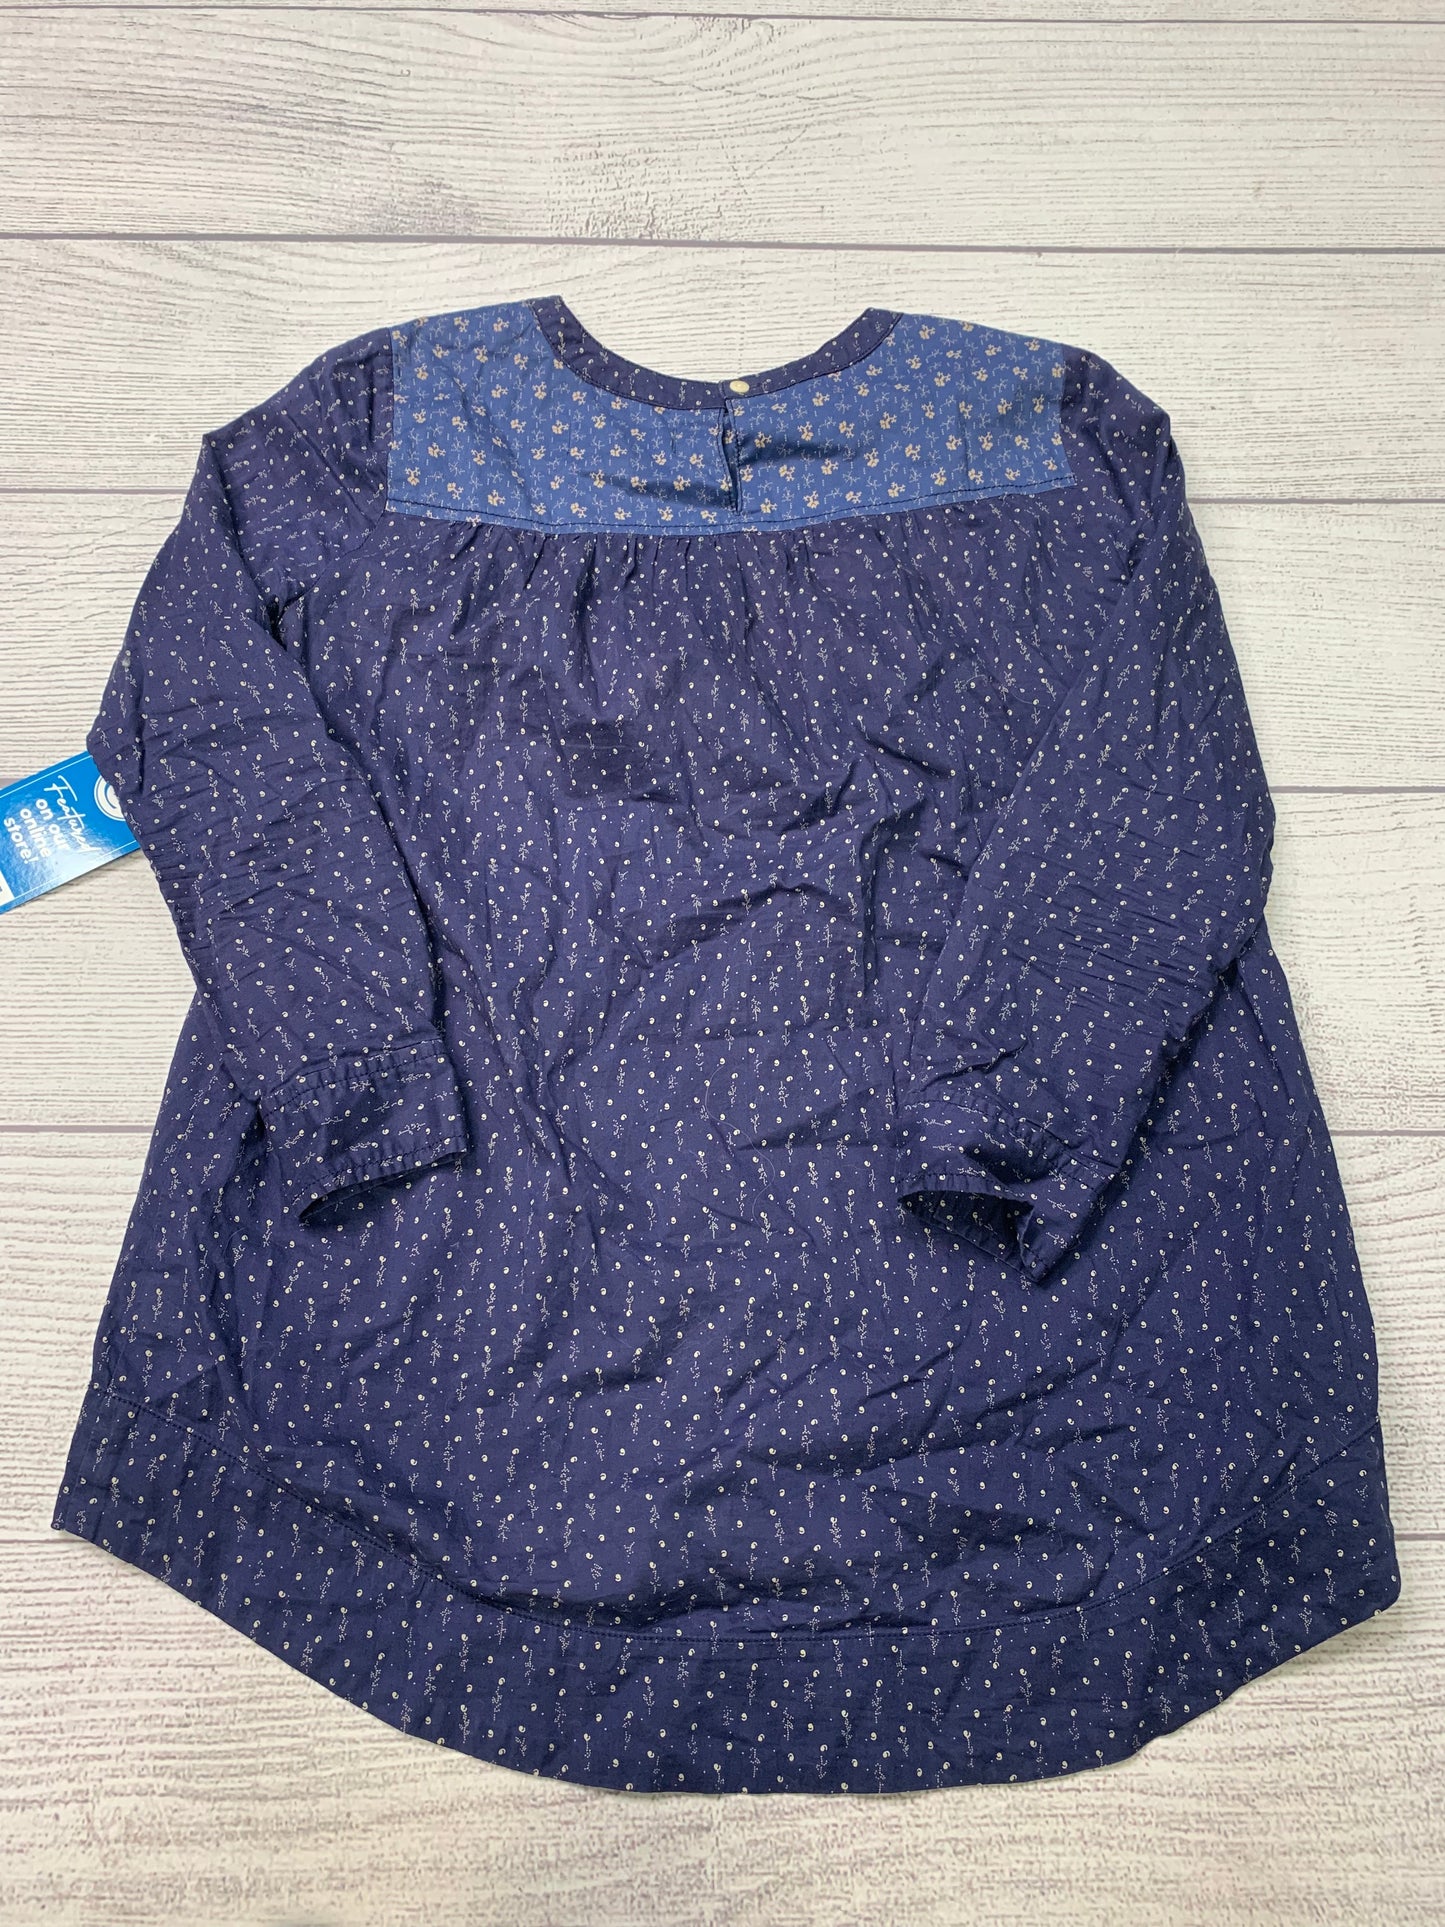 Navy Top Long Sleeve Madewell, Size Xs